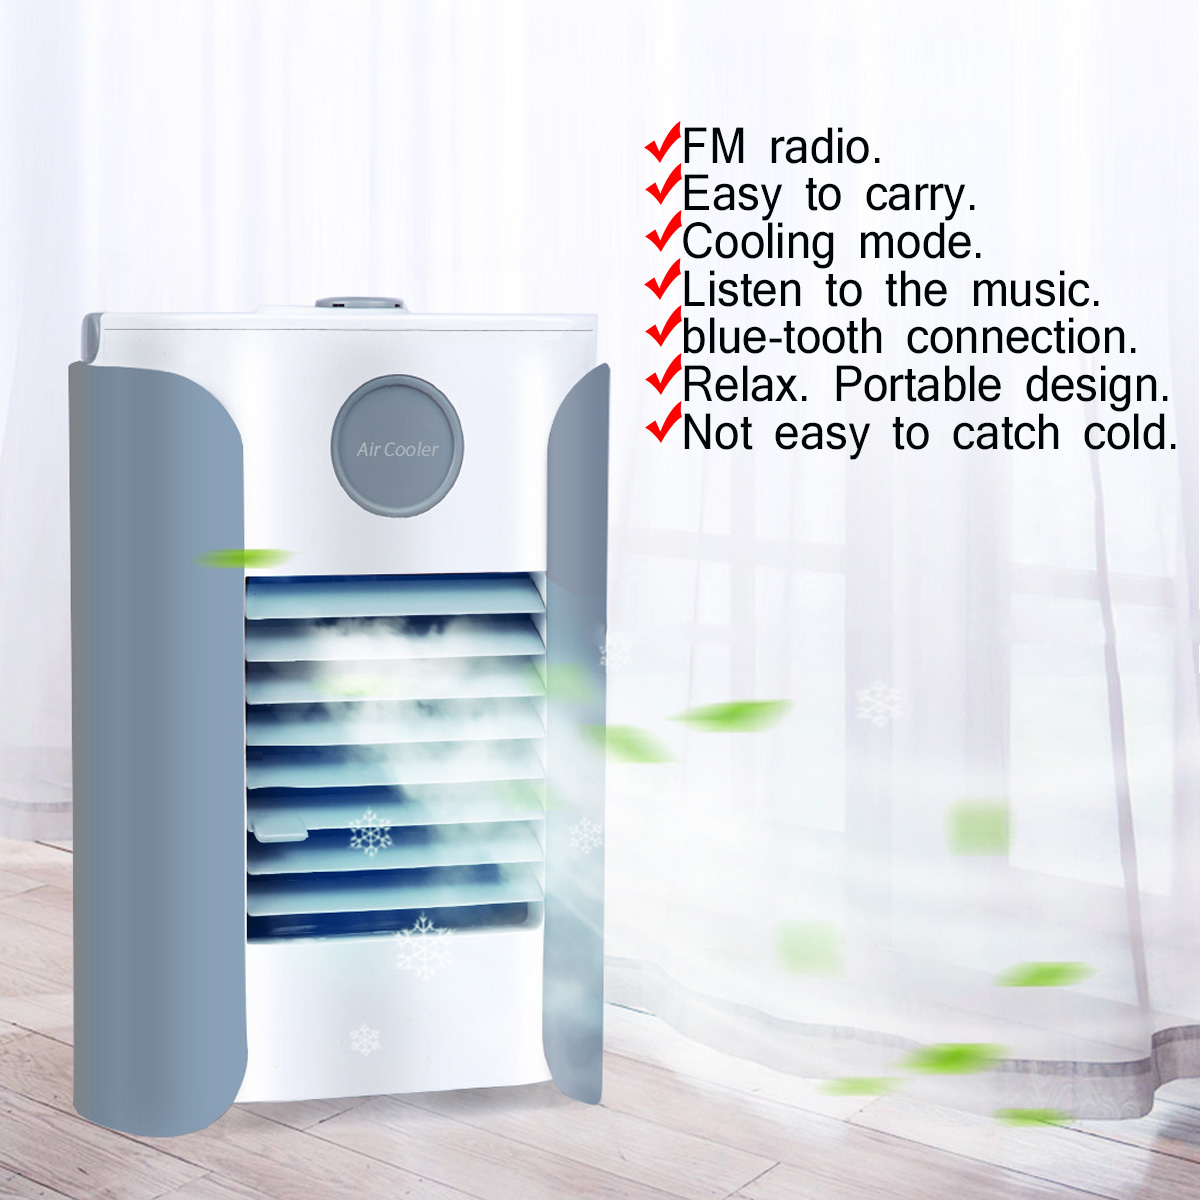 USB-Multifunction-Humidifier-Portable-Air-Conditioner-Fan-Cooling-bluetooth-Speaker-Gifts-for-Family-1675300-2